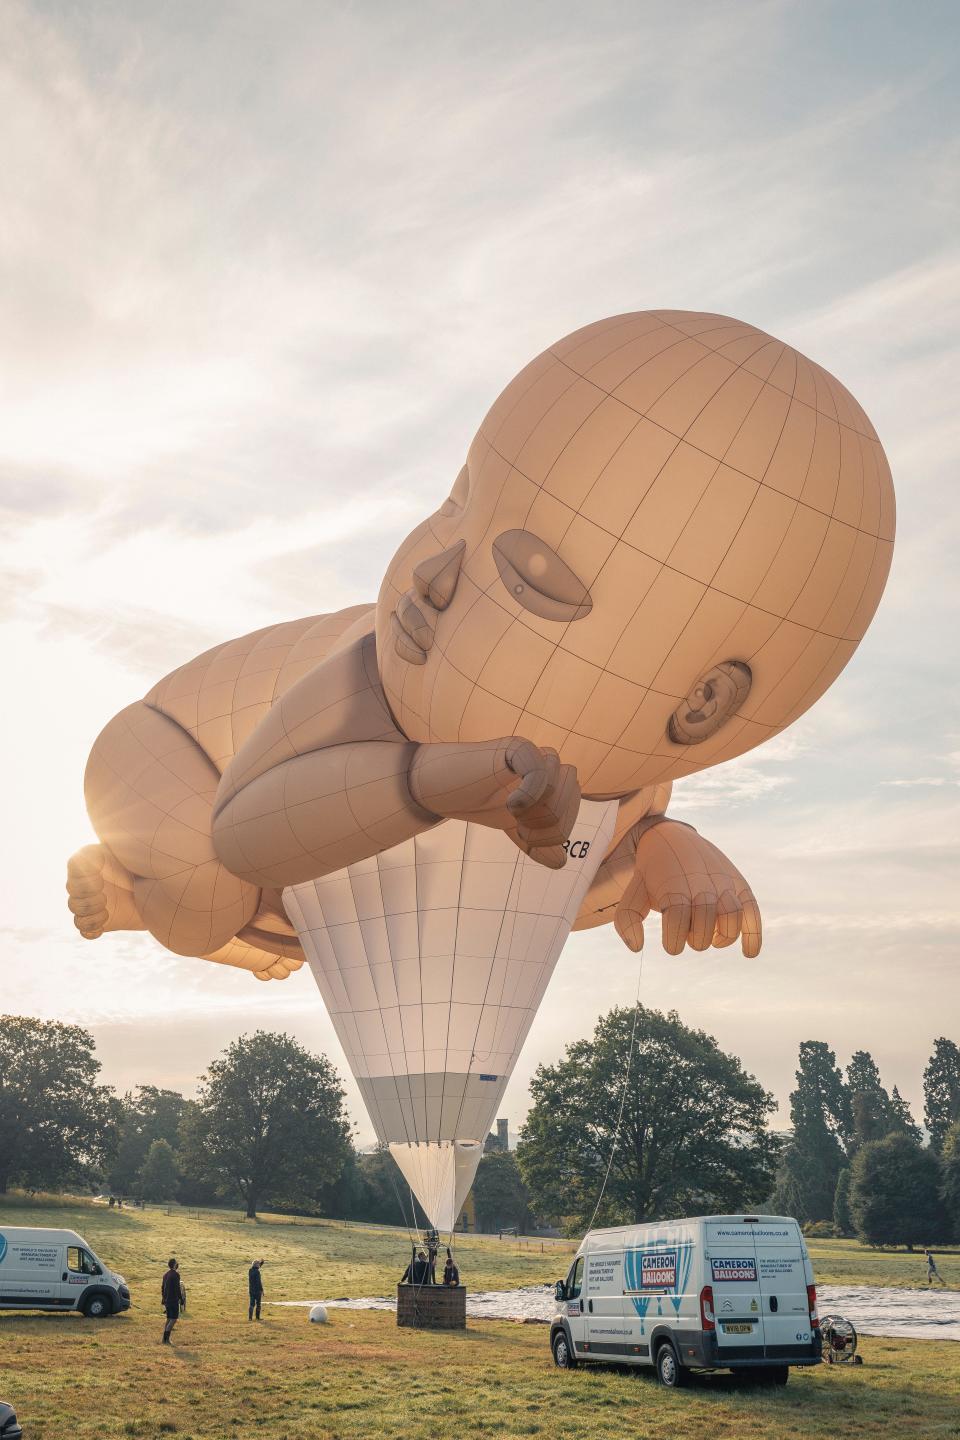 On Make Music Milwaukee day June 21, "Baby You," a 112-foot long hot air balloon, will fly over Veterans Park as a choir sings.